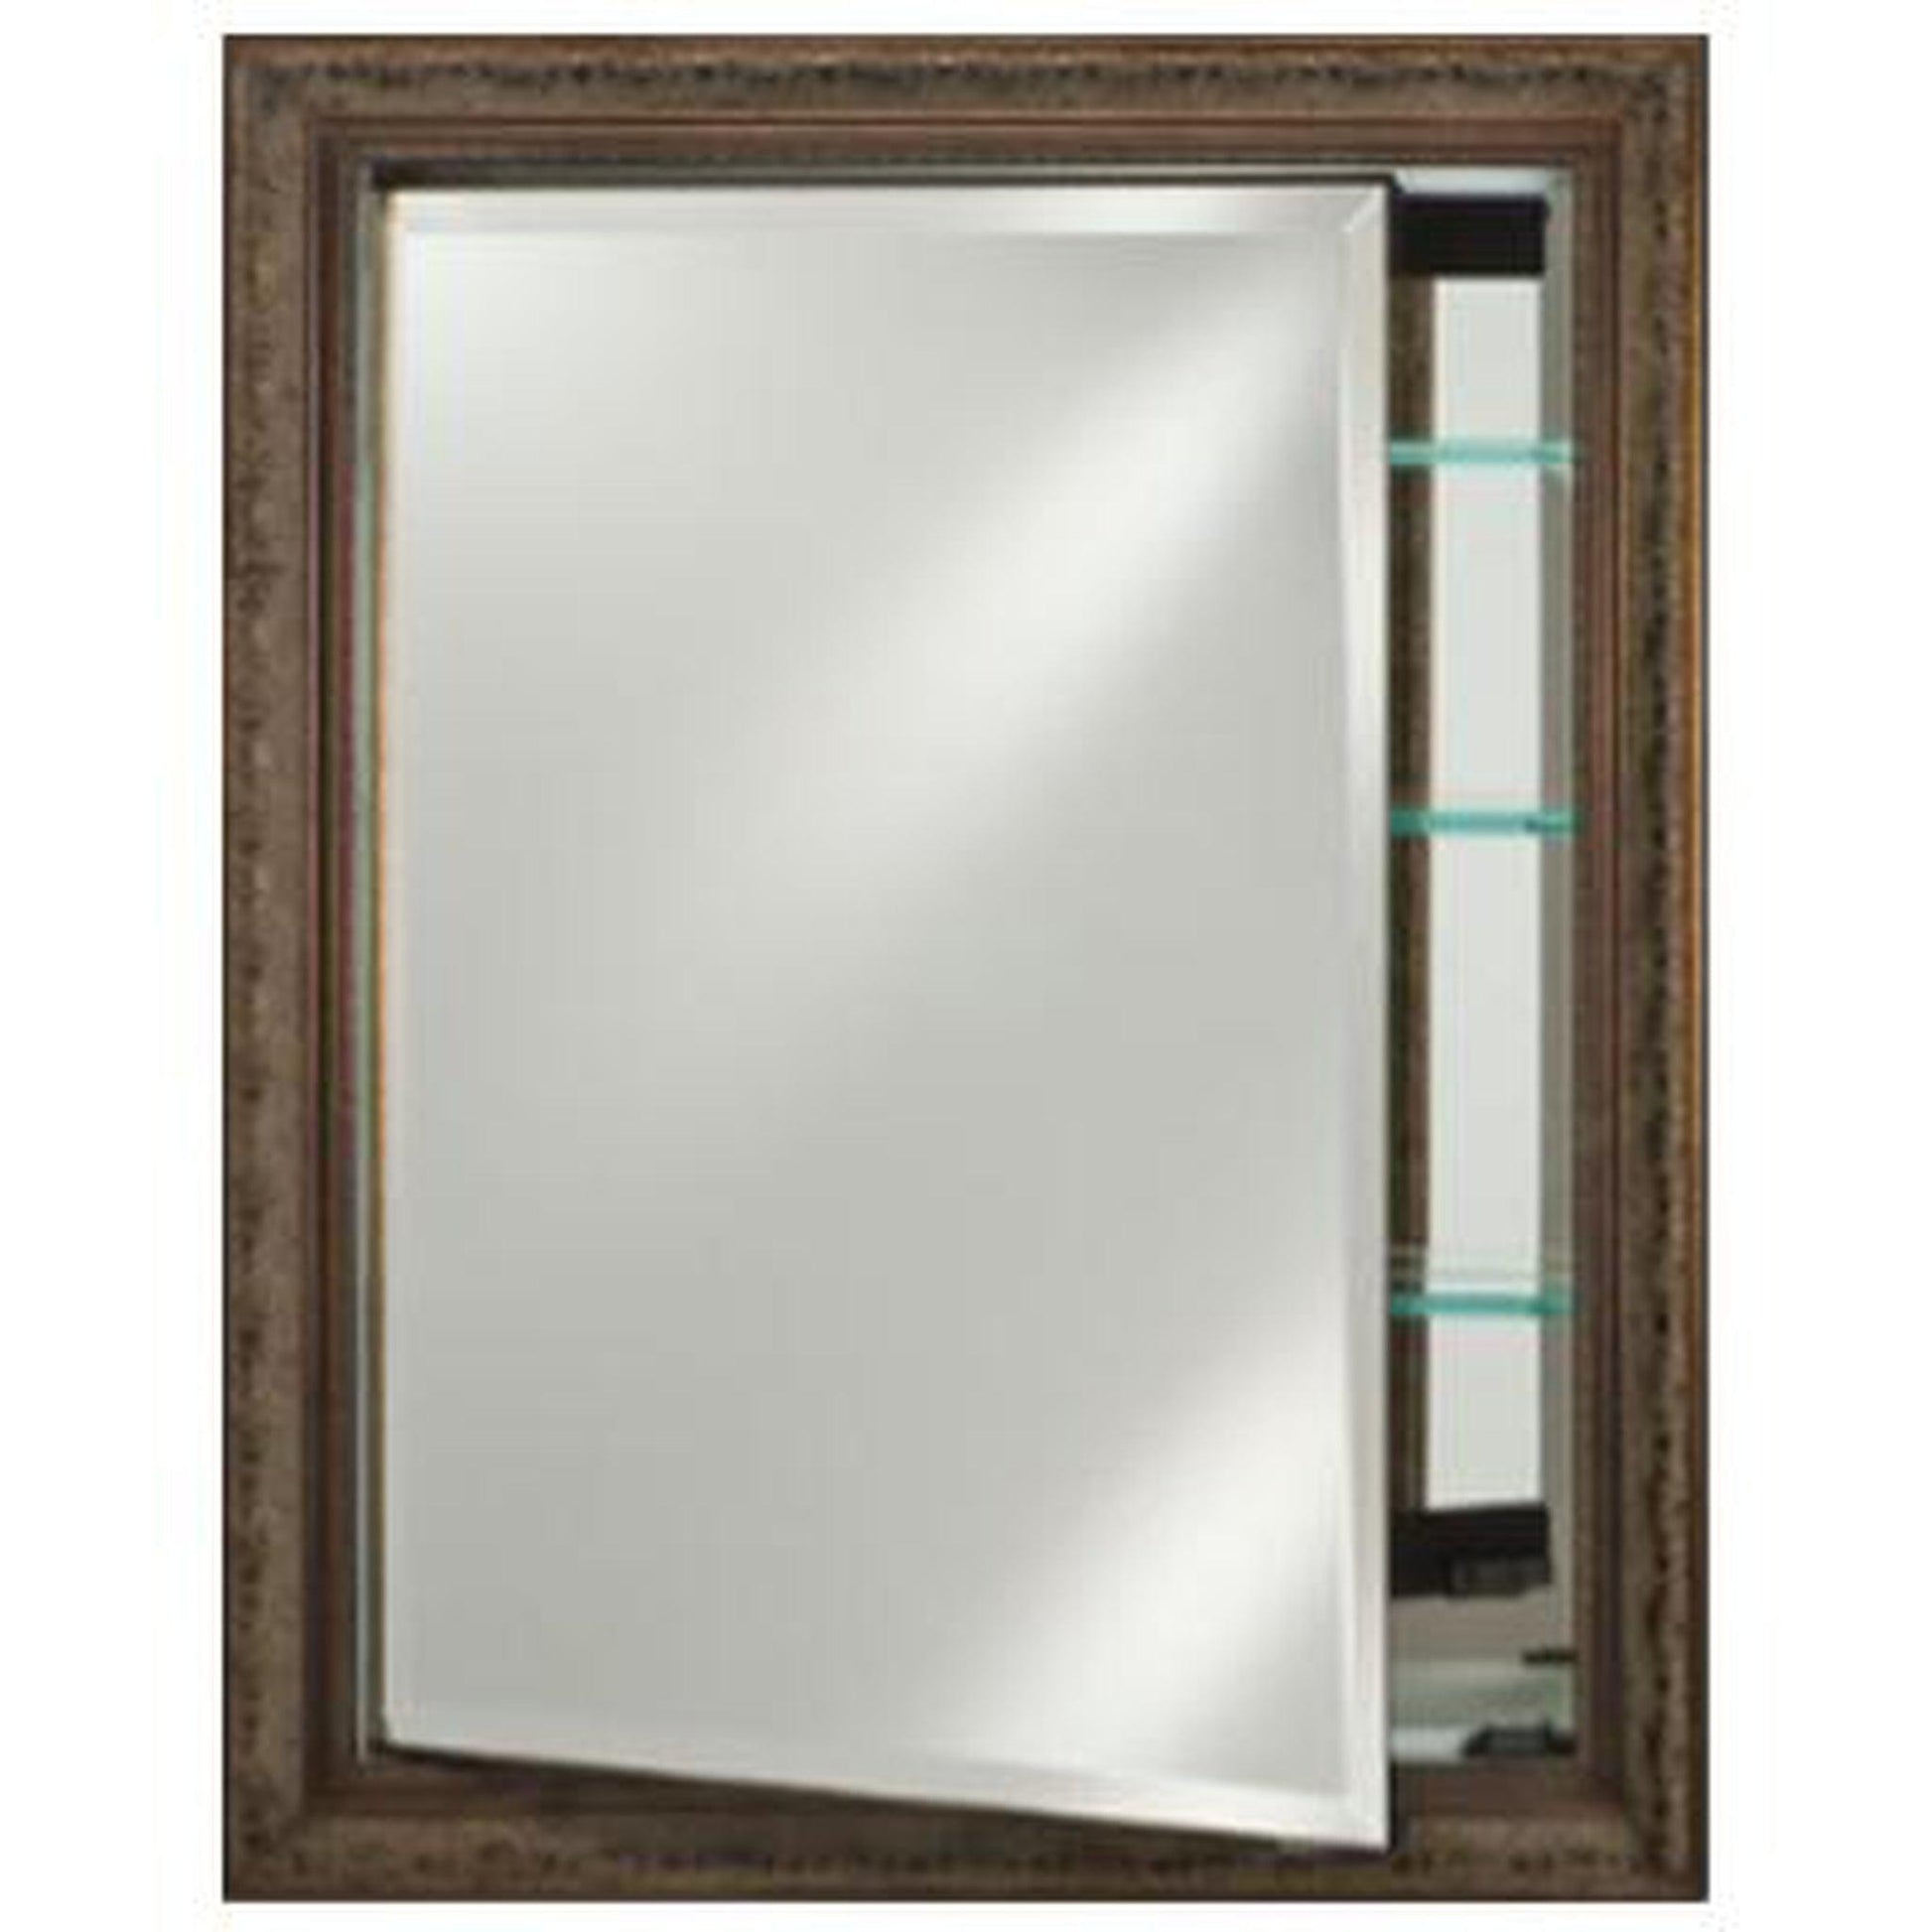 Afina Signature 24" x 30" Polished Glimmer-Flat Recessed Reversible Hinged Single Door Medicine Cabinet With Beveled Edge Mirror